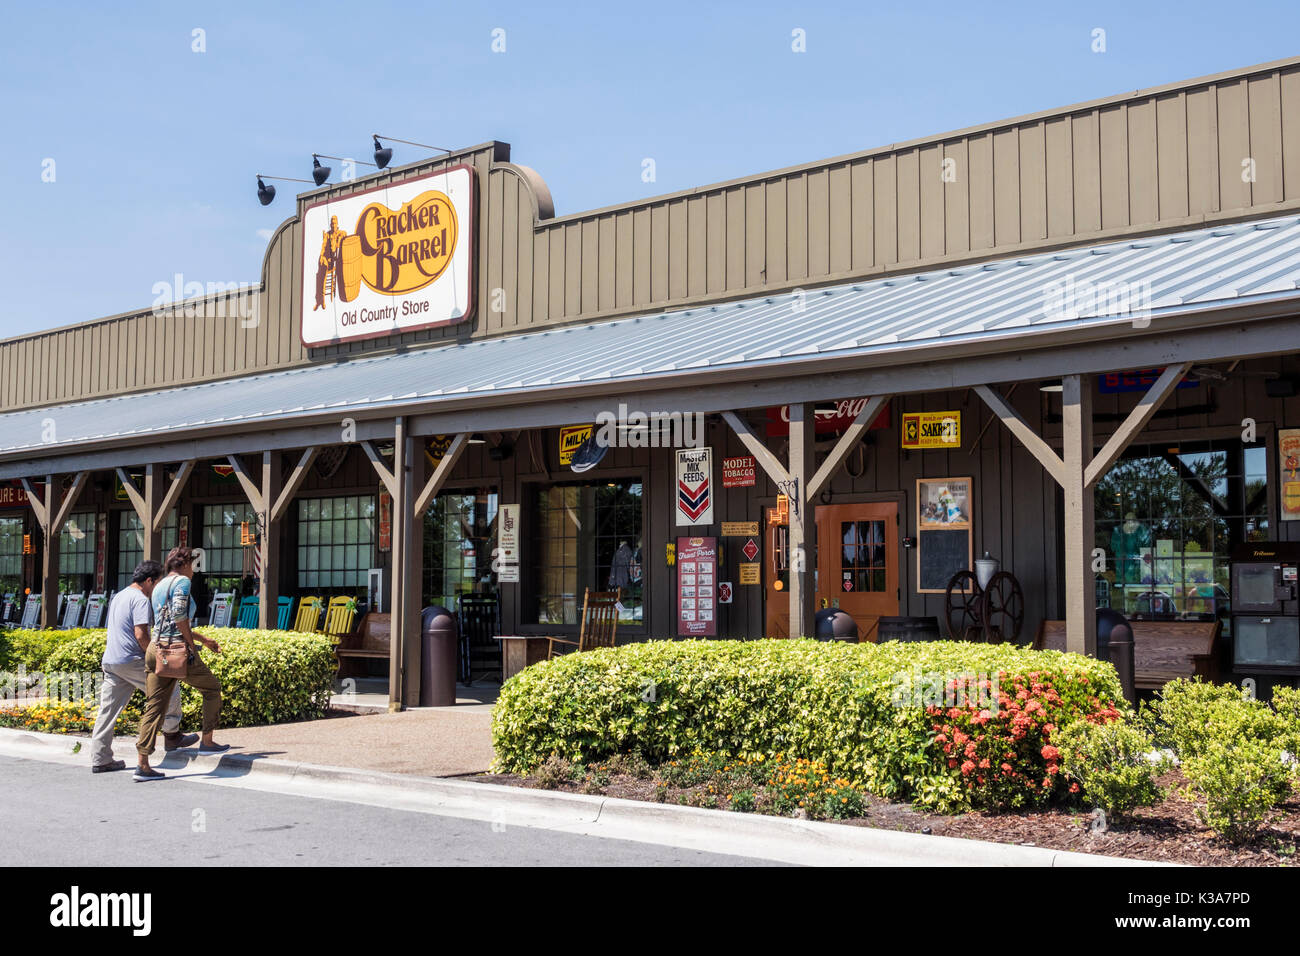 Florida,Fort Pierce,Cracker Barrel Old Country Store,restaurant restaurants food dining eating out cafe cafes bistro,gift shop,Southern theme,outside Stock Photo